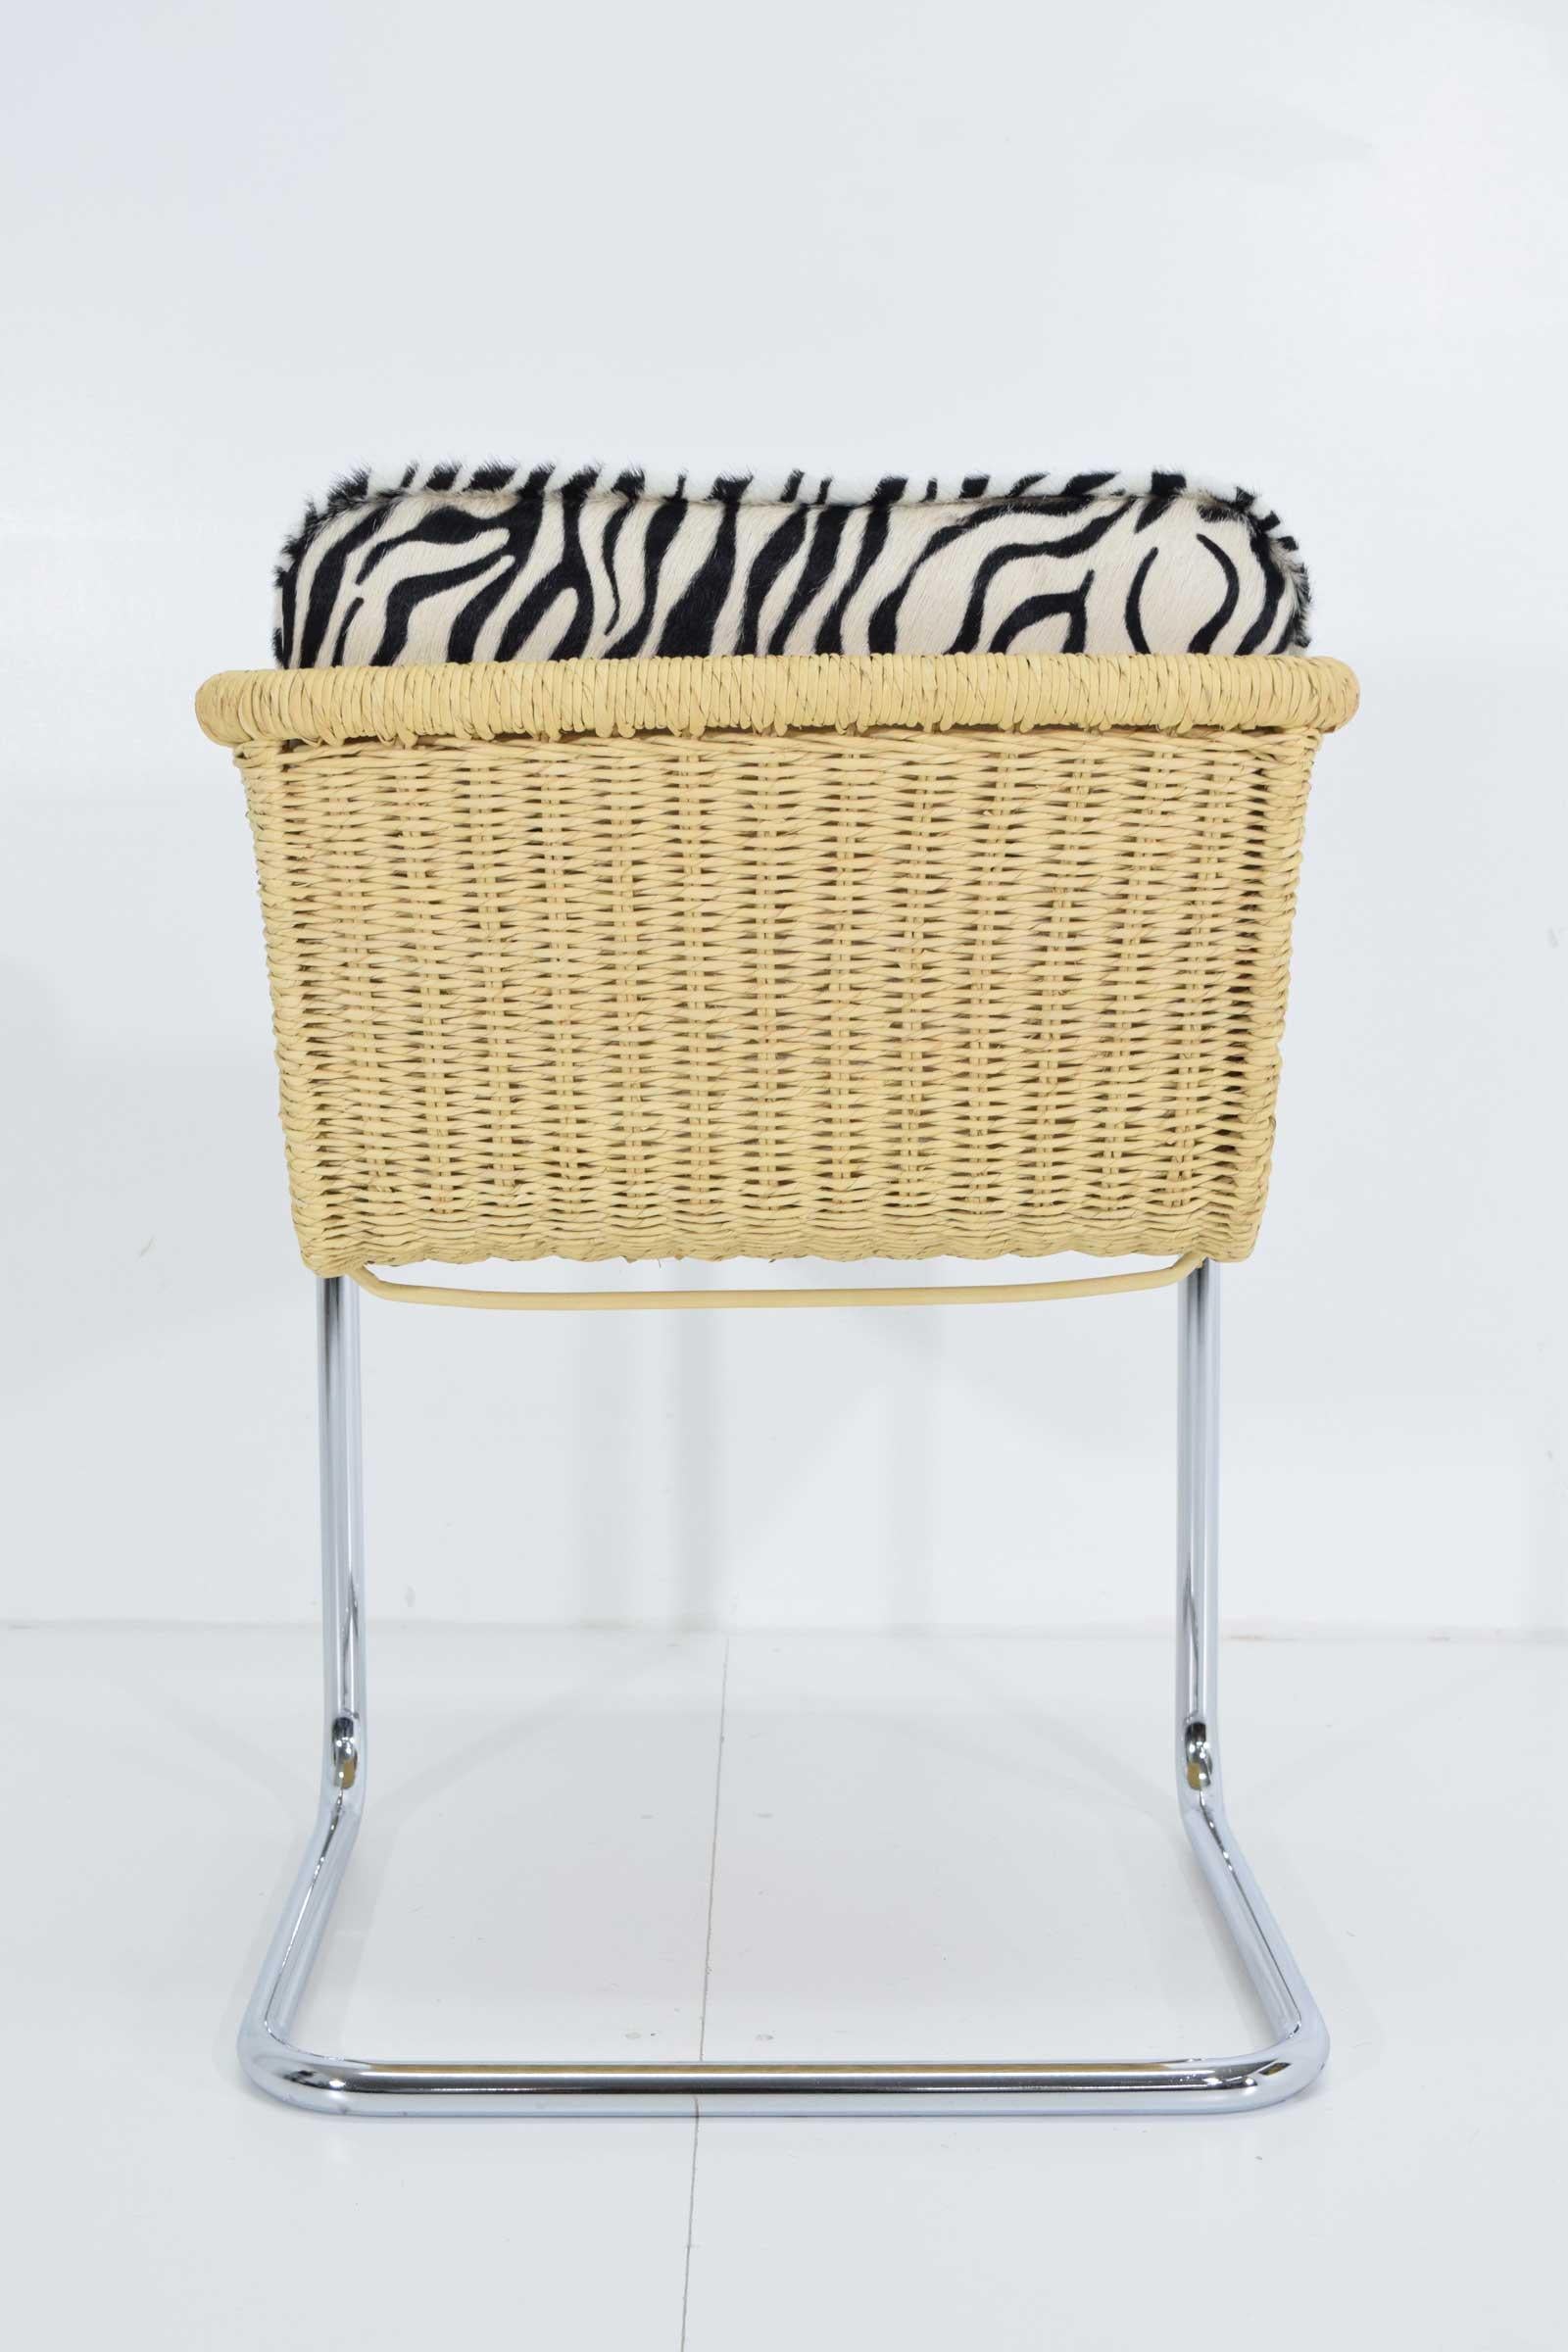 Harvey Probber Wicker Dining Chairs with Zebra Hide Cushions 2